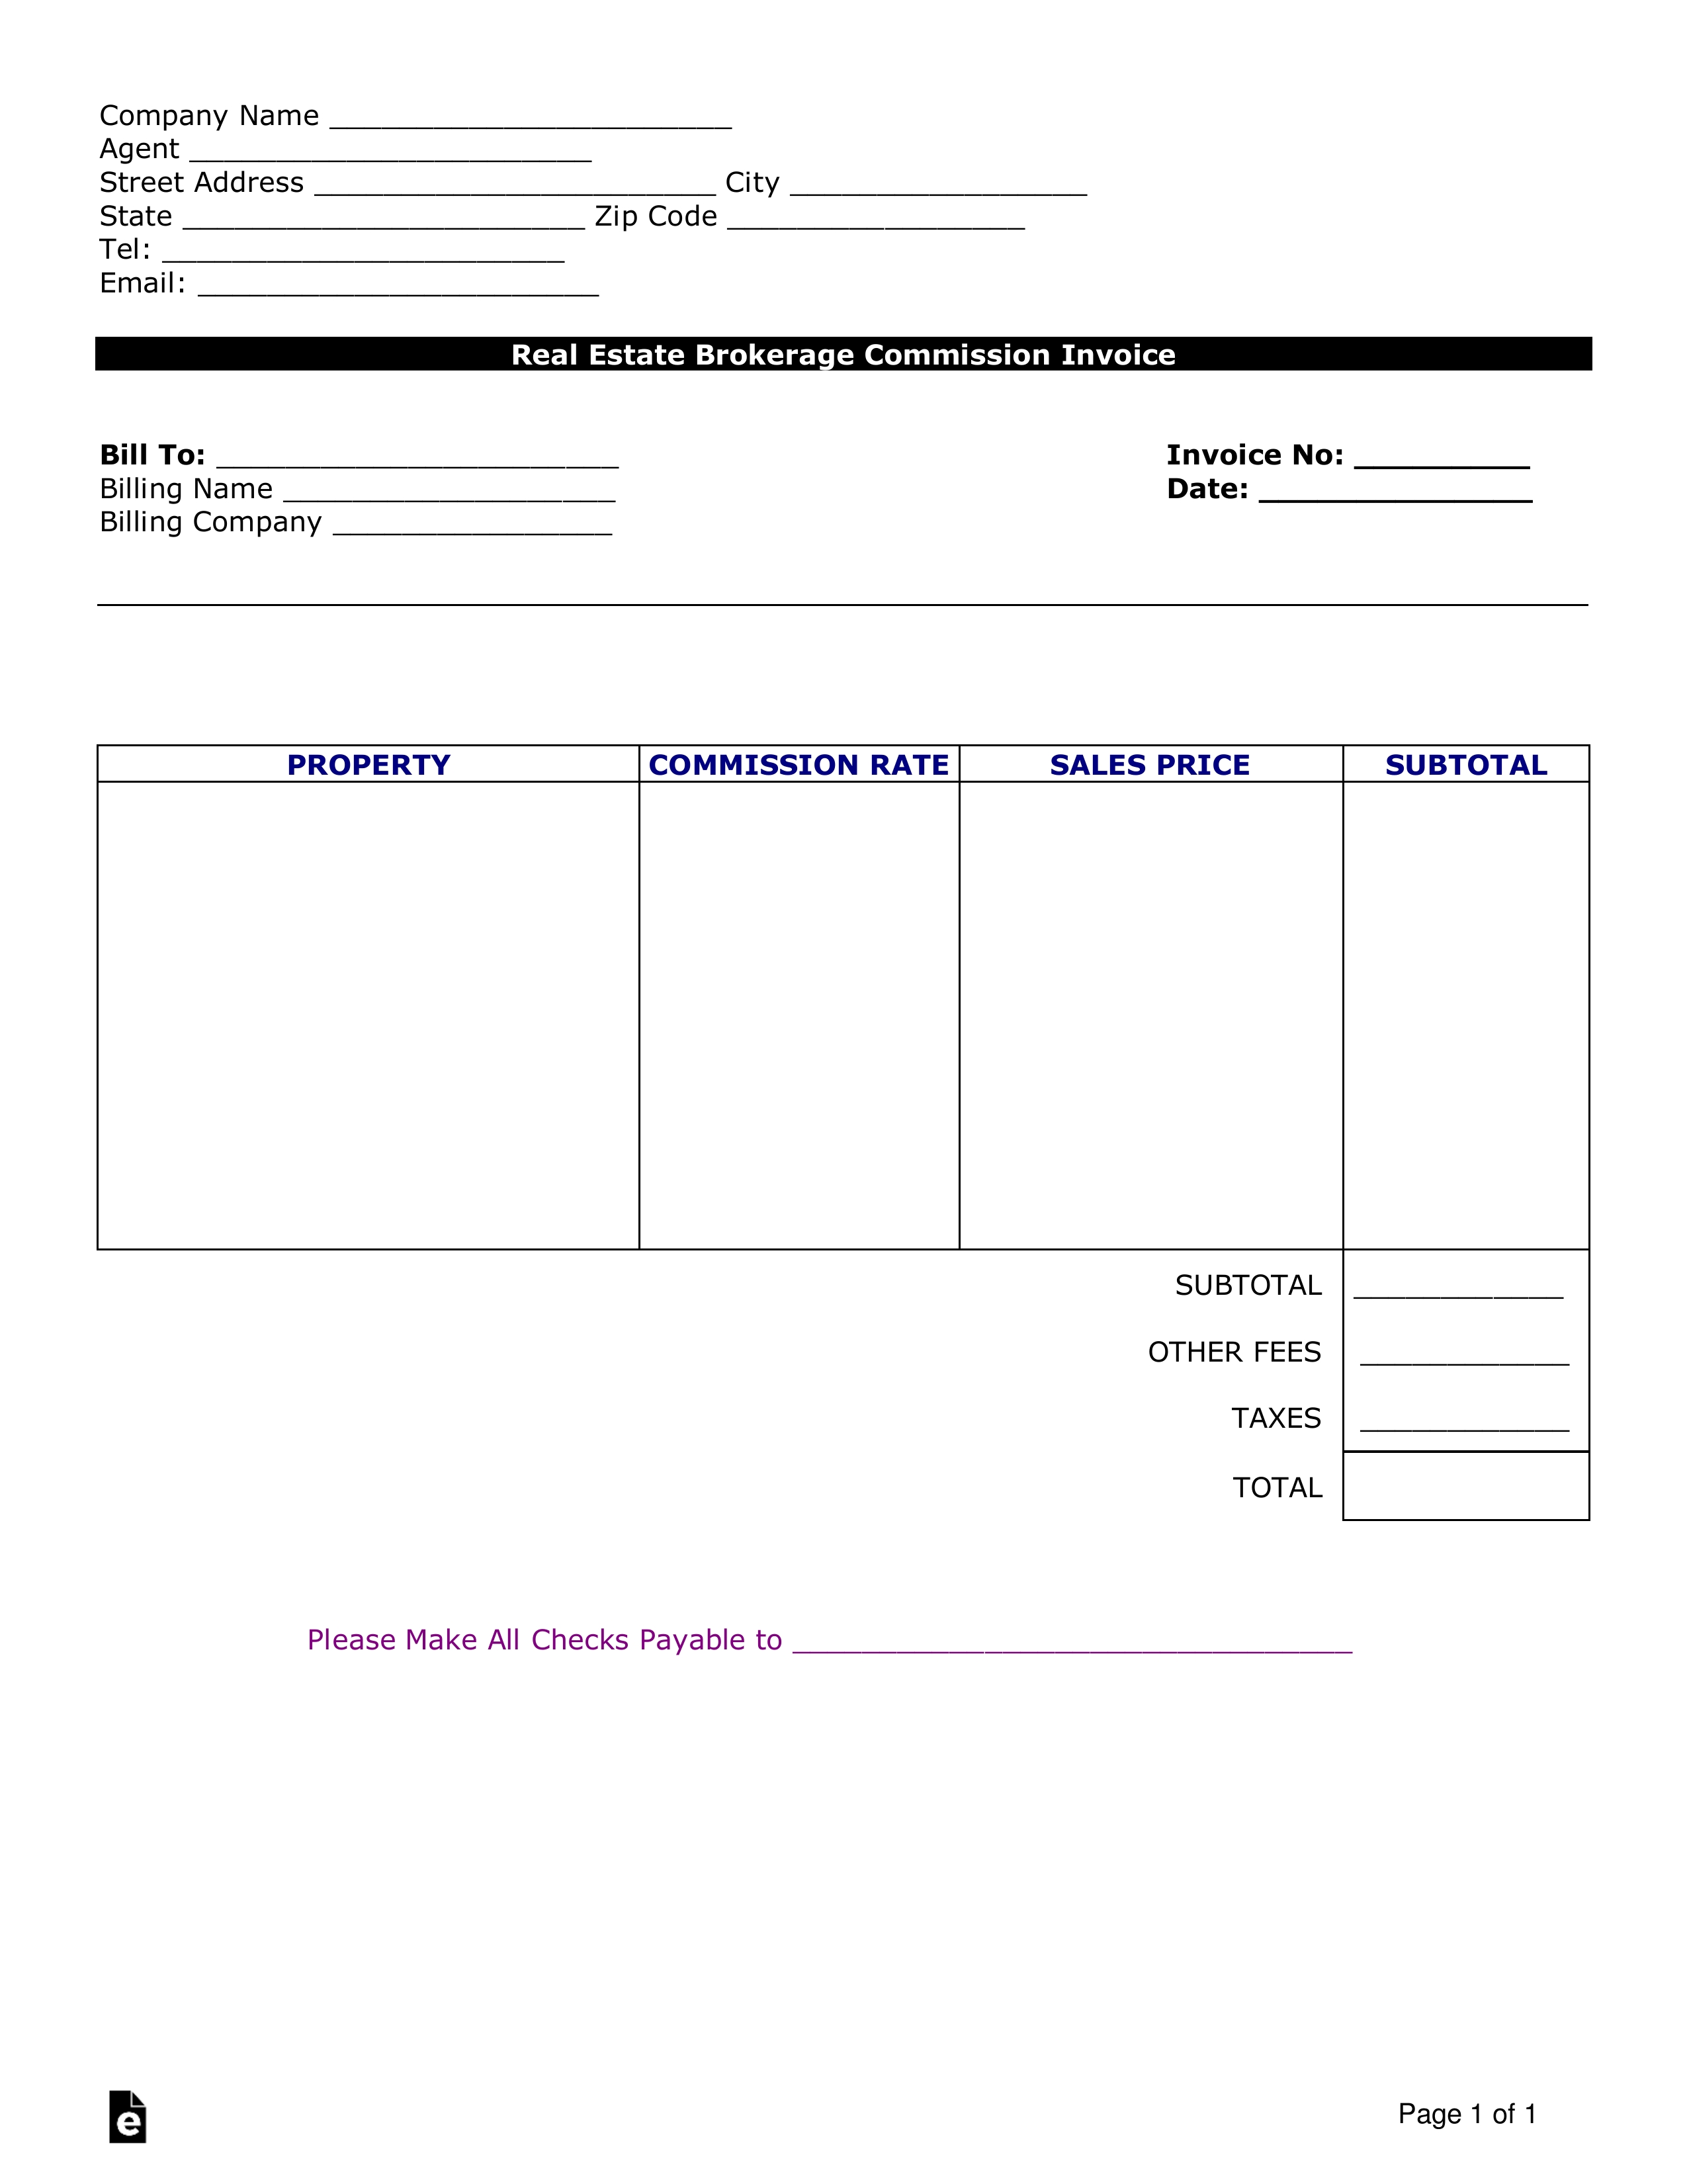 free real estate agent commission invoice template word proforma invoice format for real estate